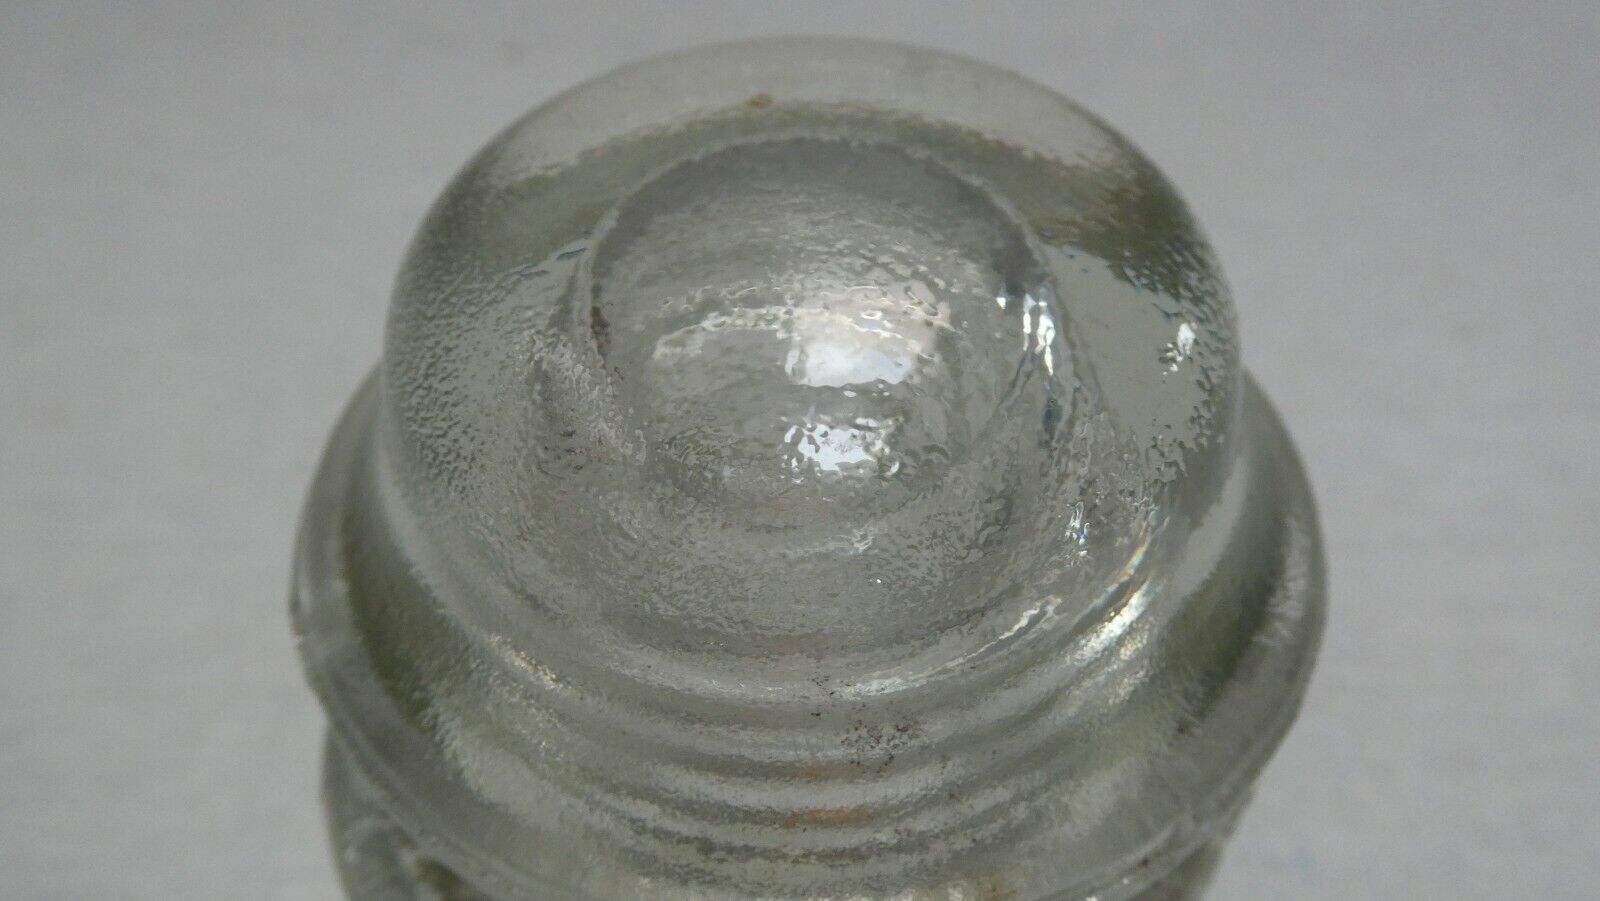 Hemingray Glass Insulator - Clear - No 45 - Lot 24-48 - Made in USA - Blemished